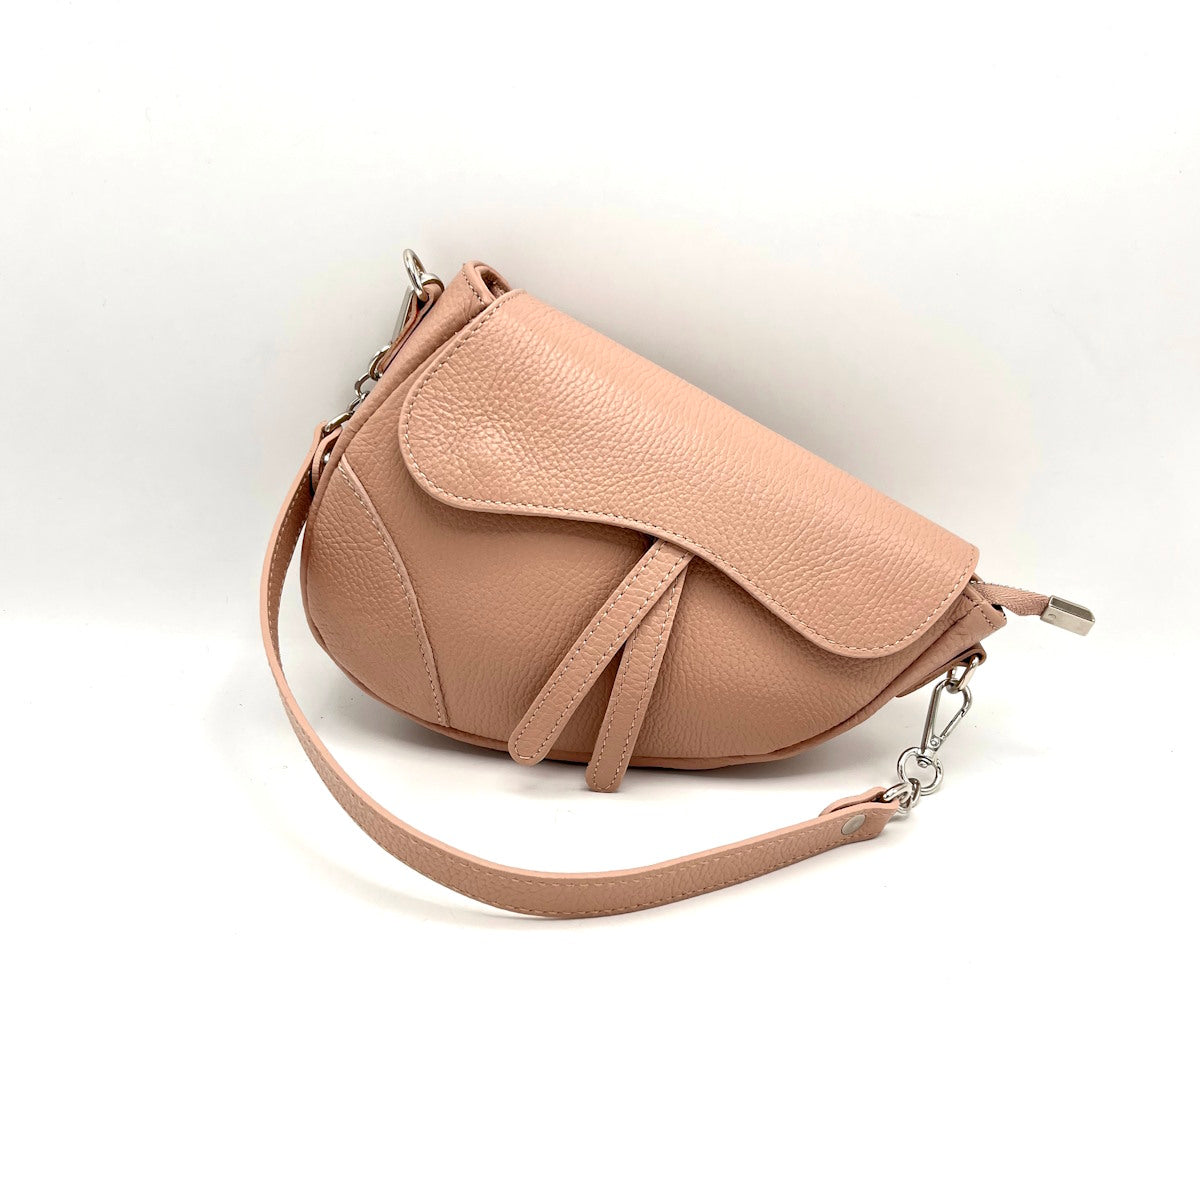 Genuine leather shoulder bag, Made in Italy, art. 112436